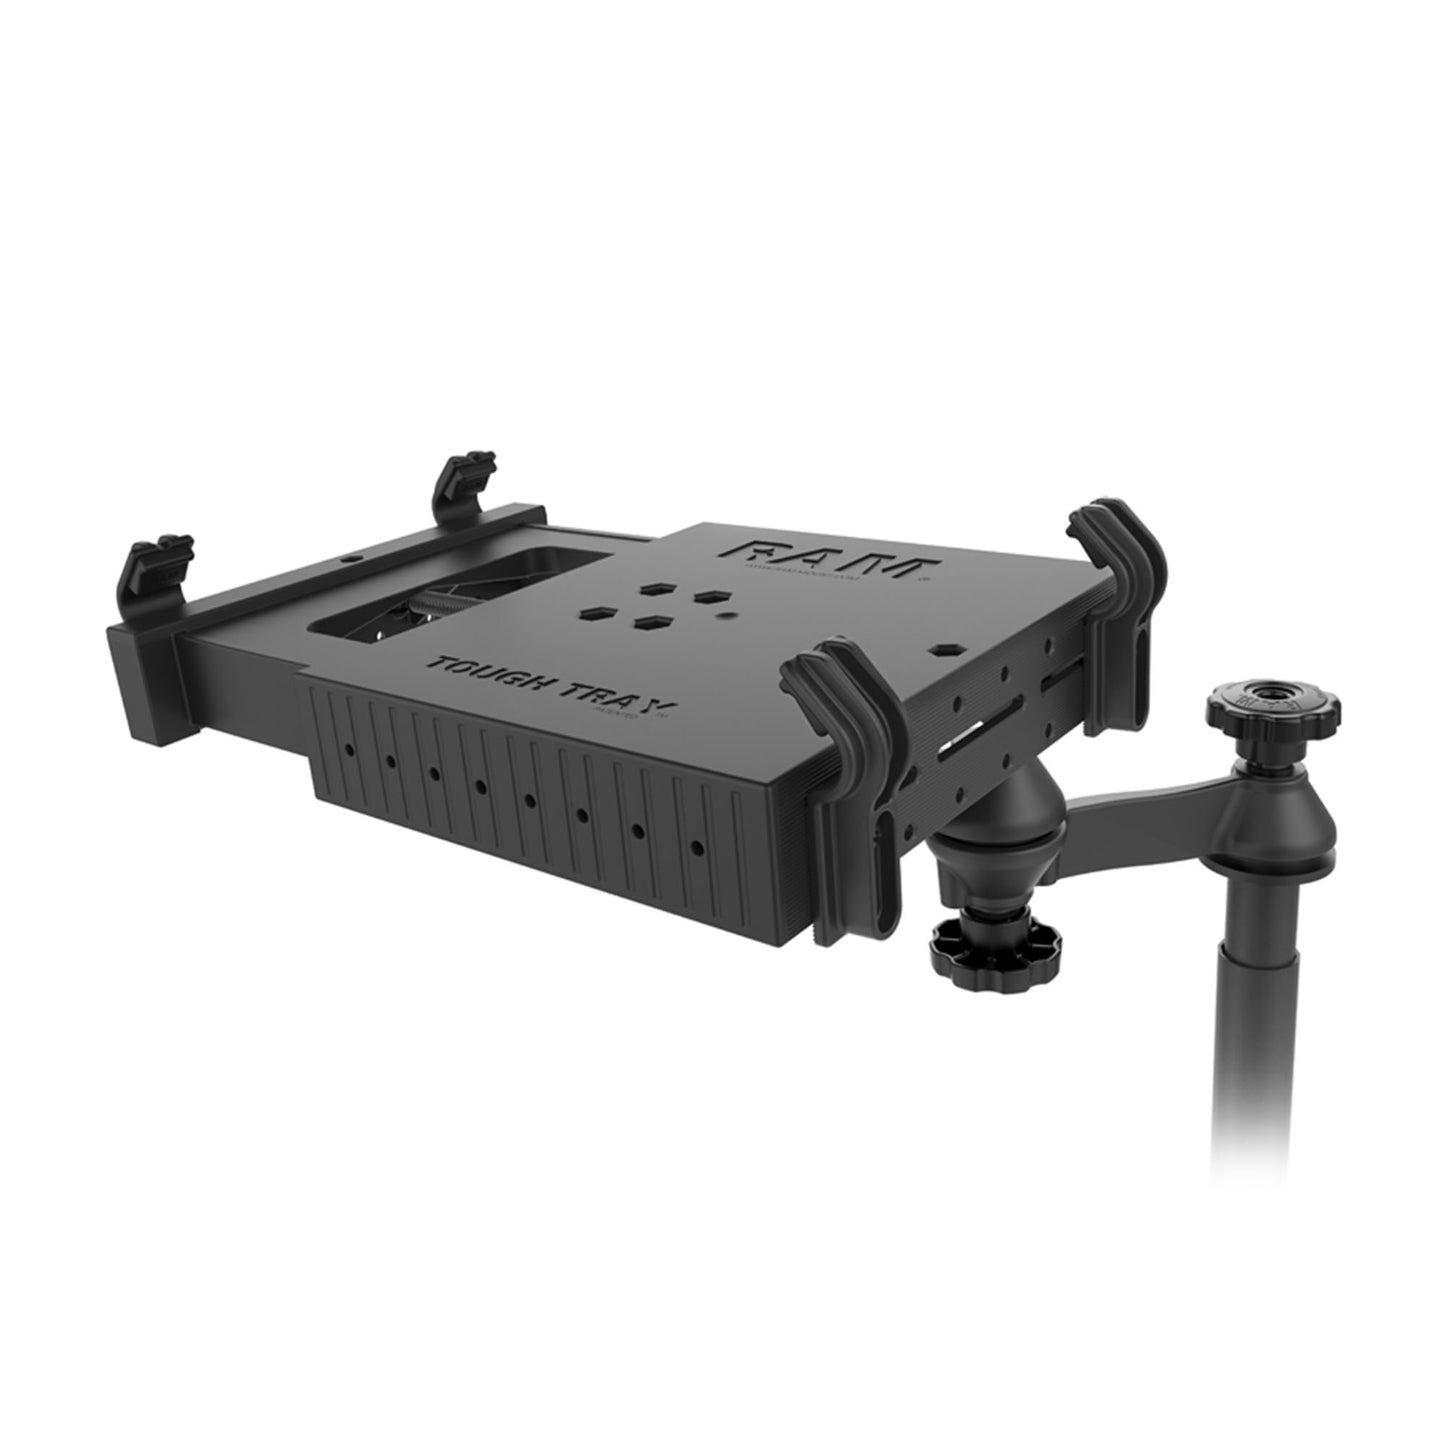 RAM Black No-Drill Universal Laptop Mount for Vehicles - 15-06586